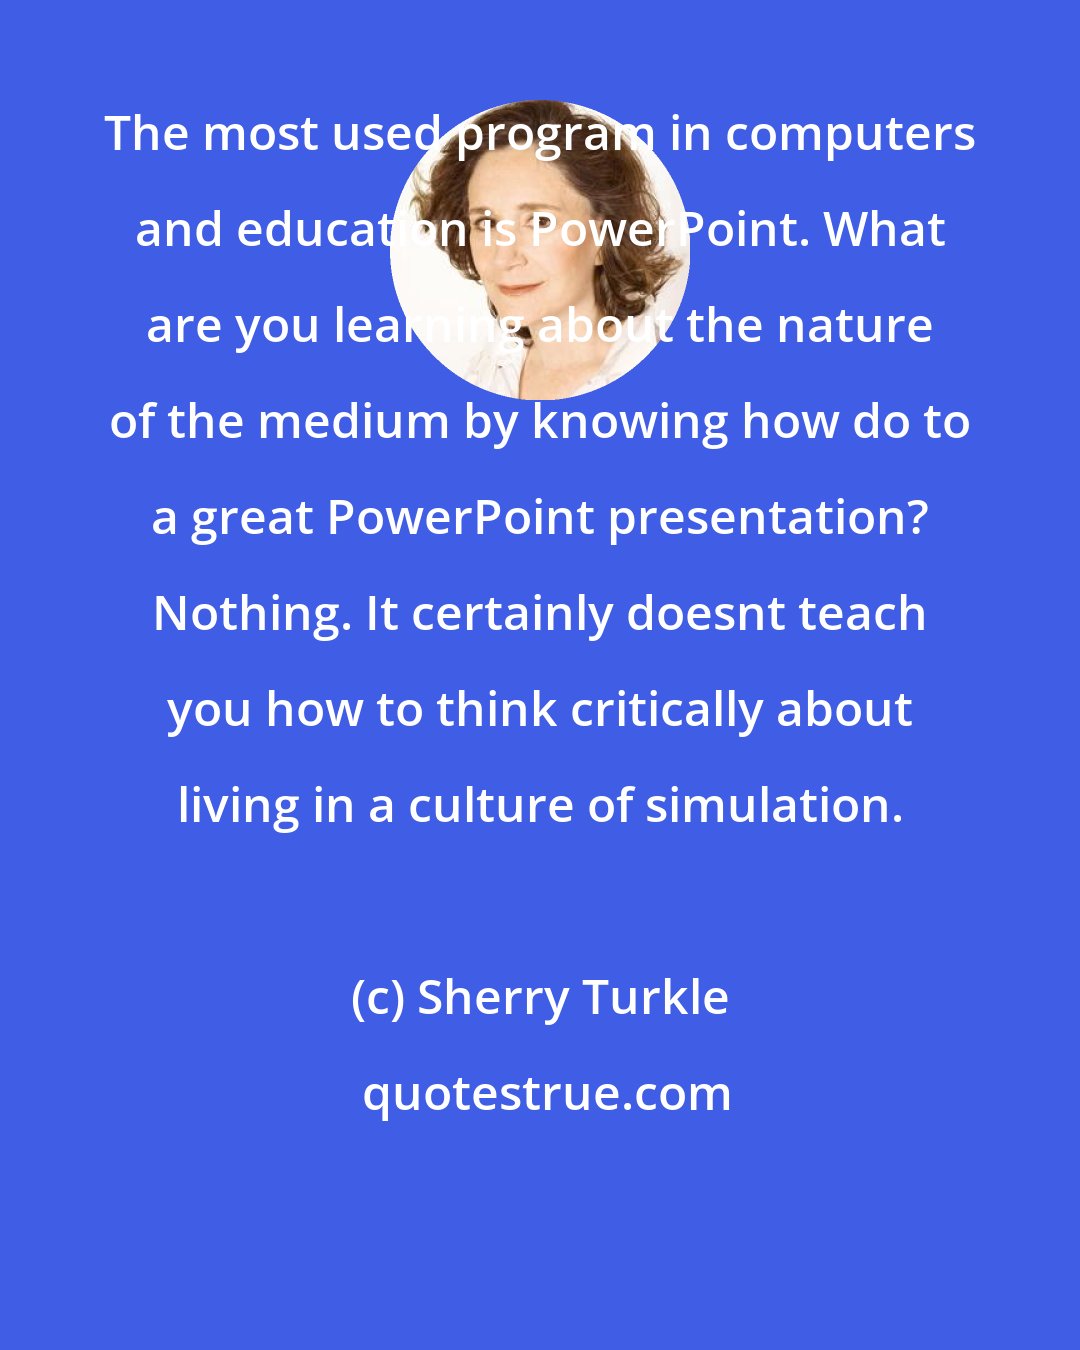 Sherry Turkle: The most used program in computers and education is PowerPoint. What are you learning about the nature of the medium by knowing how do to a great PowerPoint presentation? Nothing. It certainly doesnt teach you how to think critically about living in a culture of simulation.